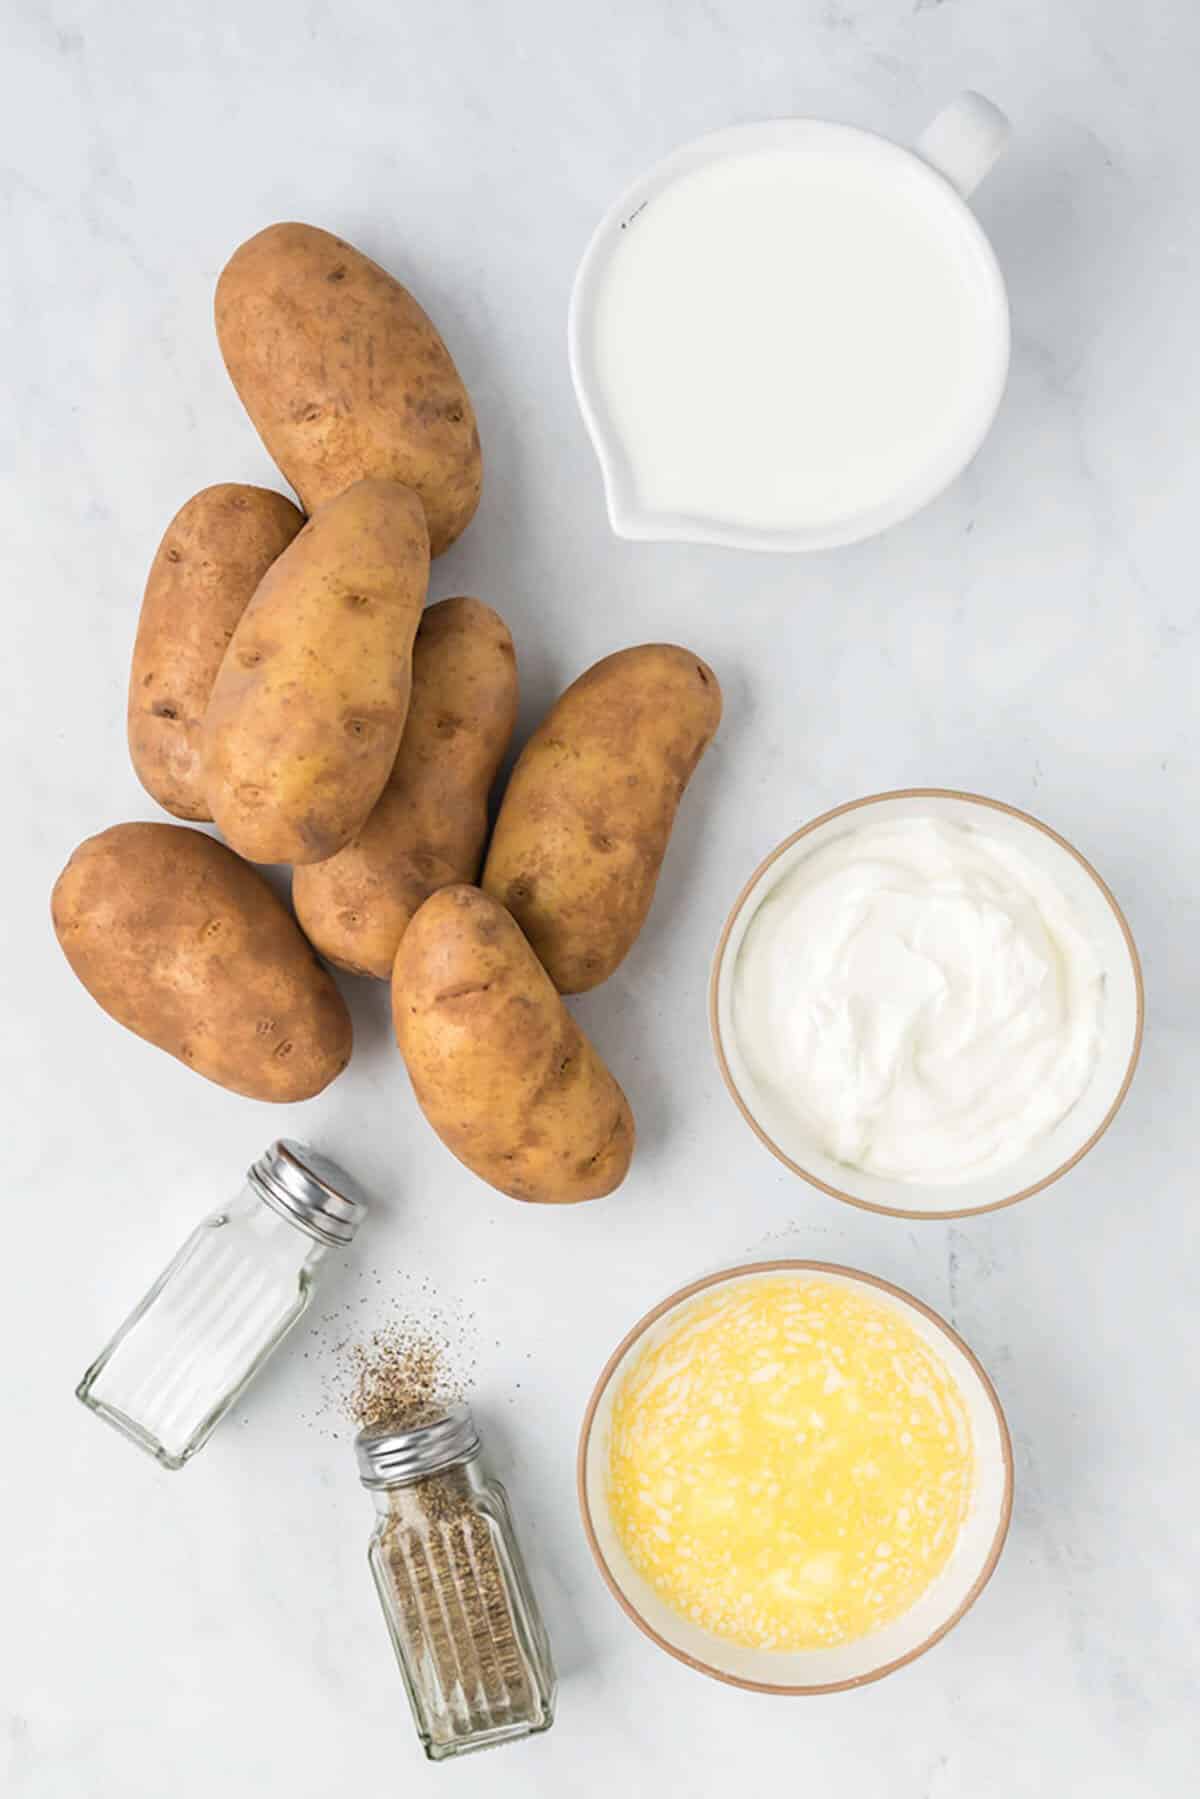 Sour cream, butter, and potatoes on the counter.